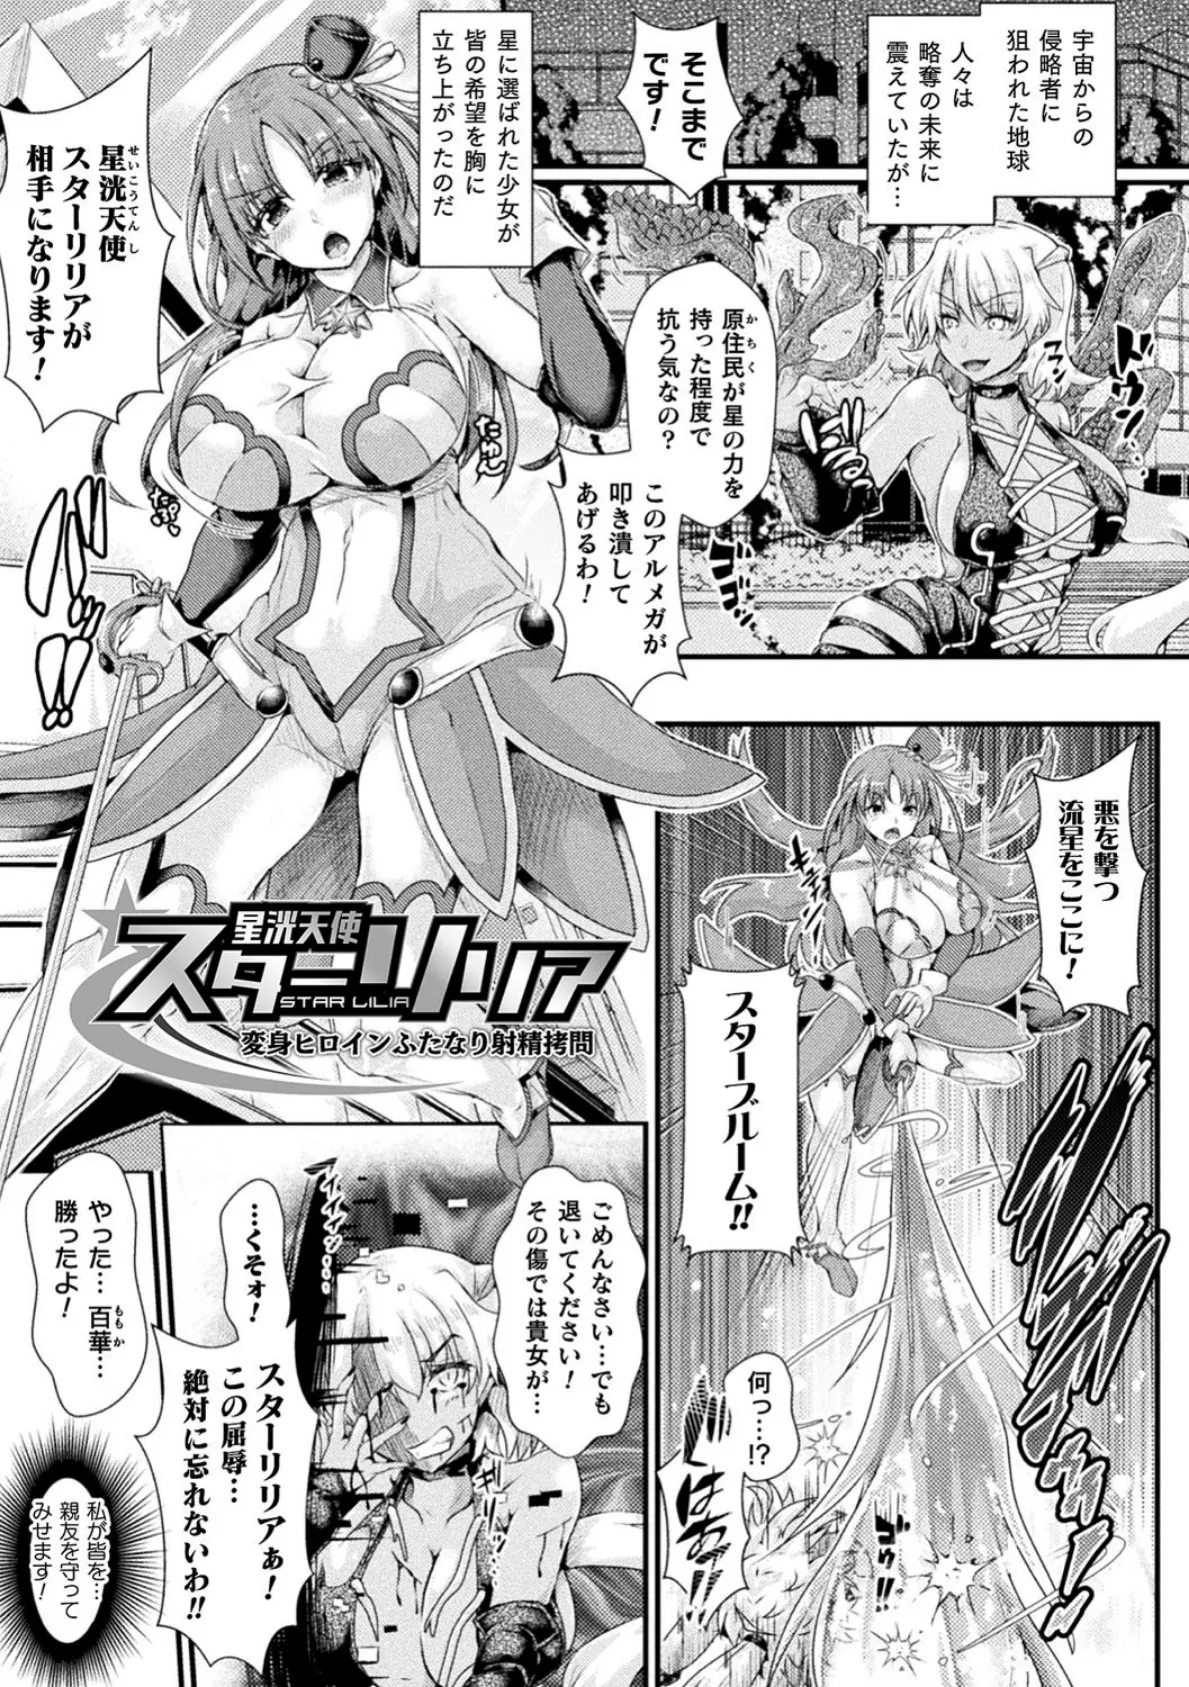 Corrupted Maiden 〜淫欲に堕ちる戦姫たち〜【電子書籍限定版】 3ページ